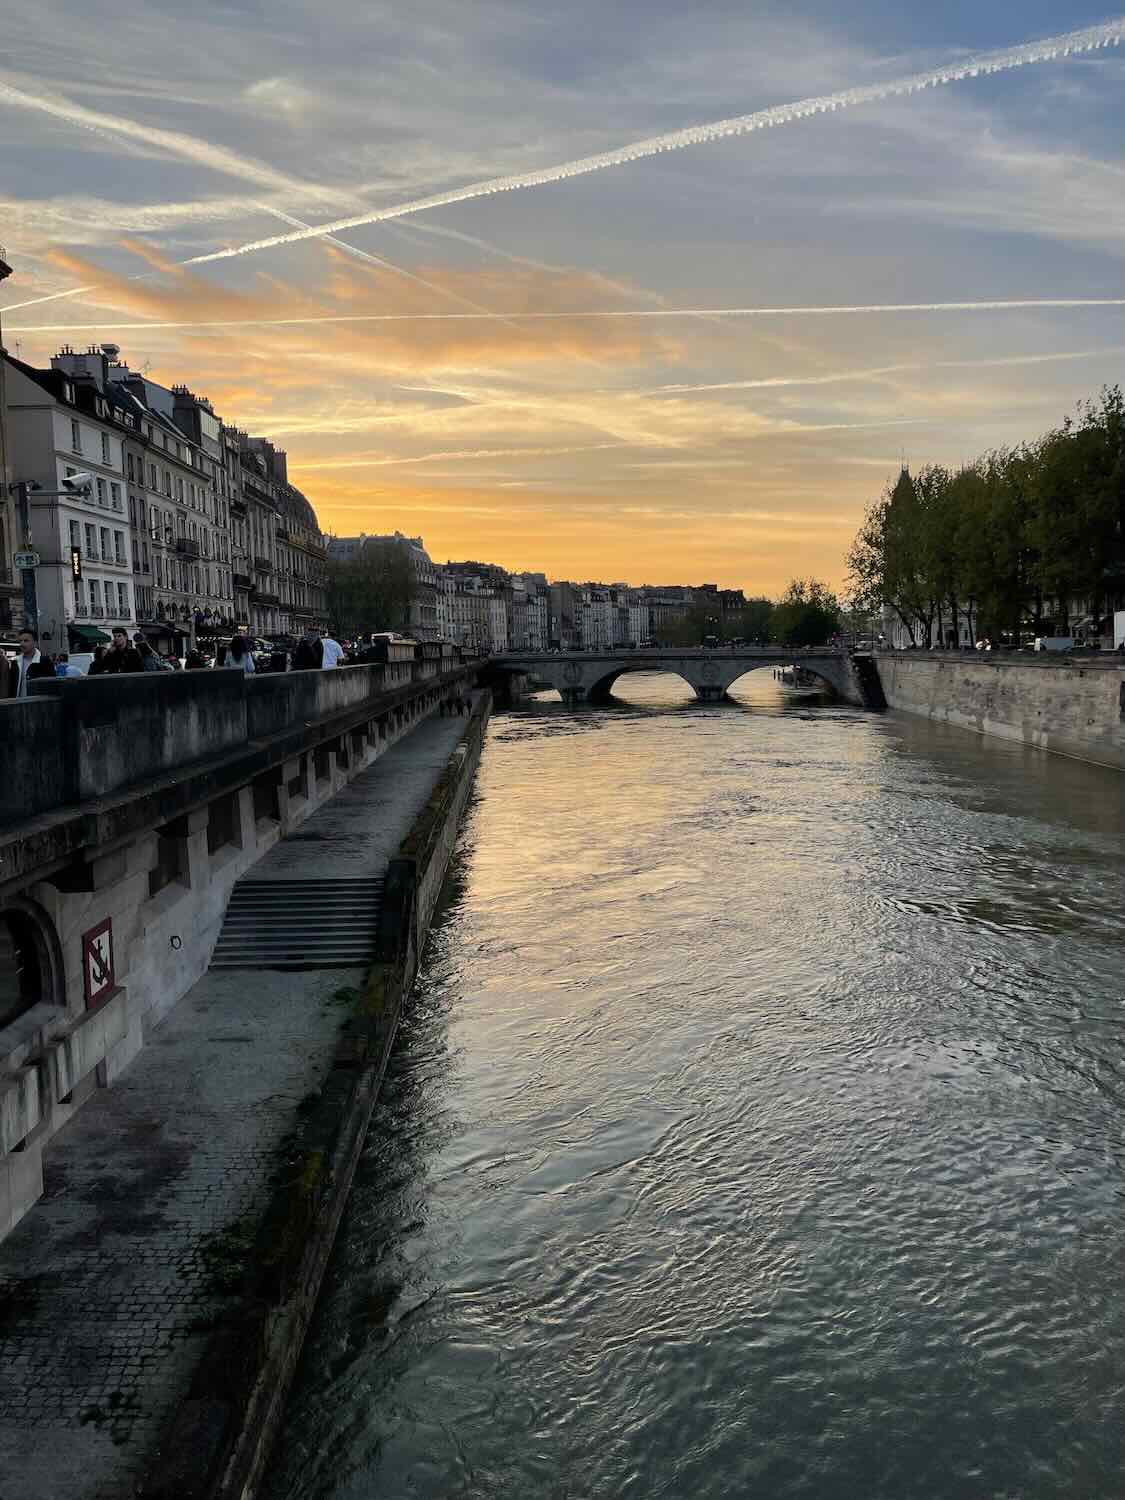 A serene river walk scene in Paris at sunset, showing the Seine River reflecting the orange sky, with historical buildings lining the banks and people enjoying the peaceful evening.